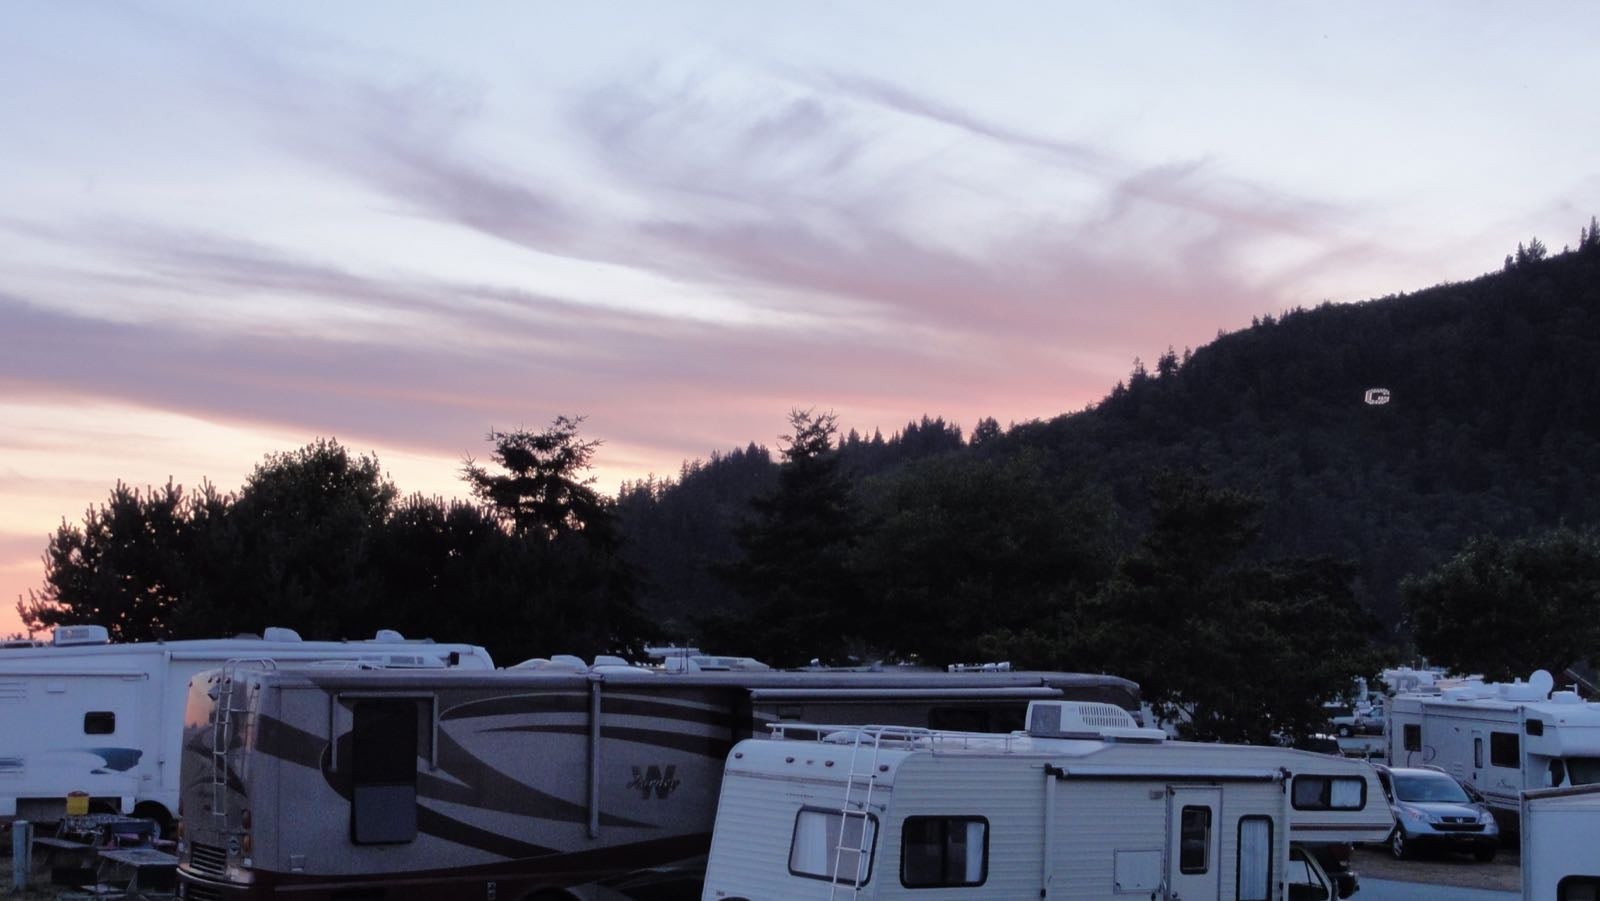 The RV area, which didn't seem nearly as nice as the group camping area (though pretty sunset).